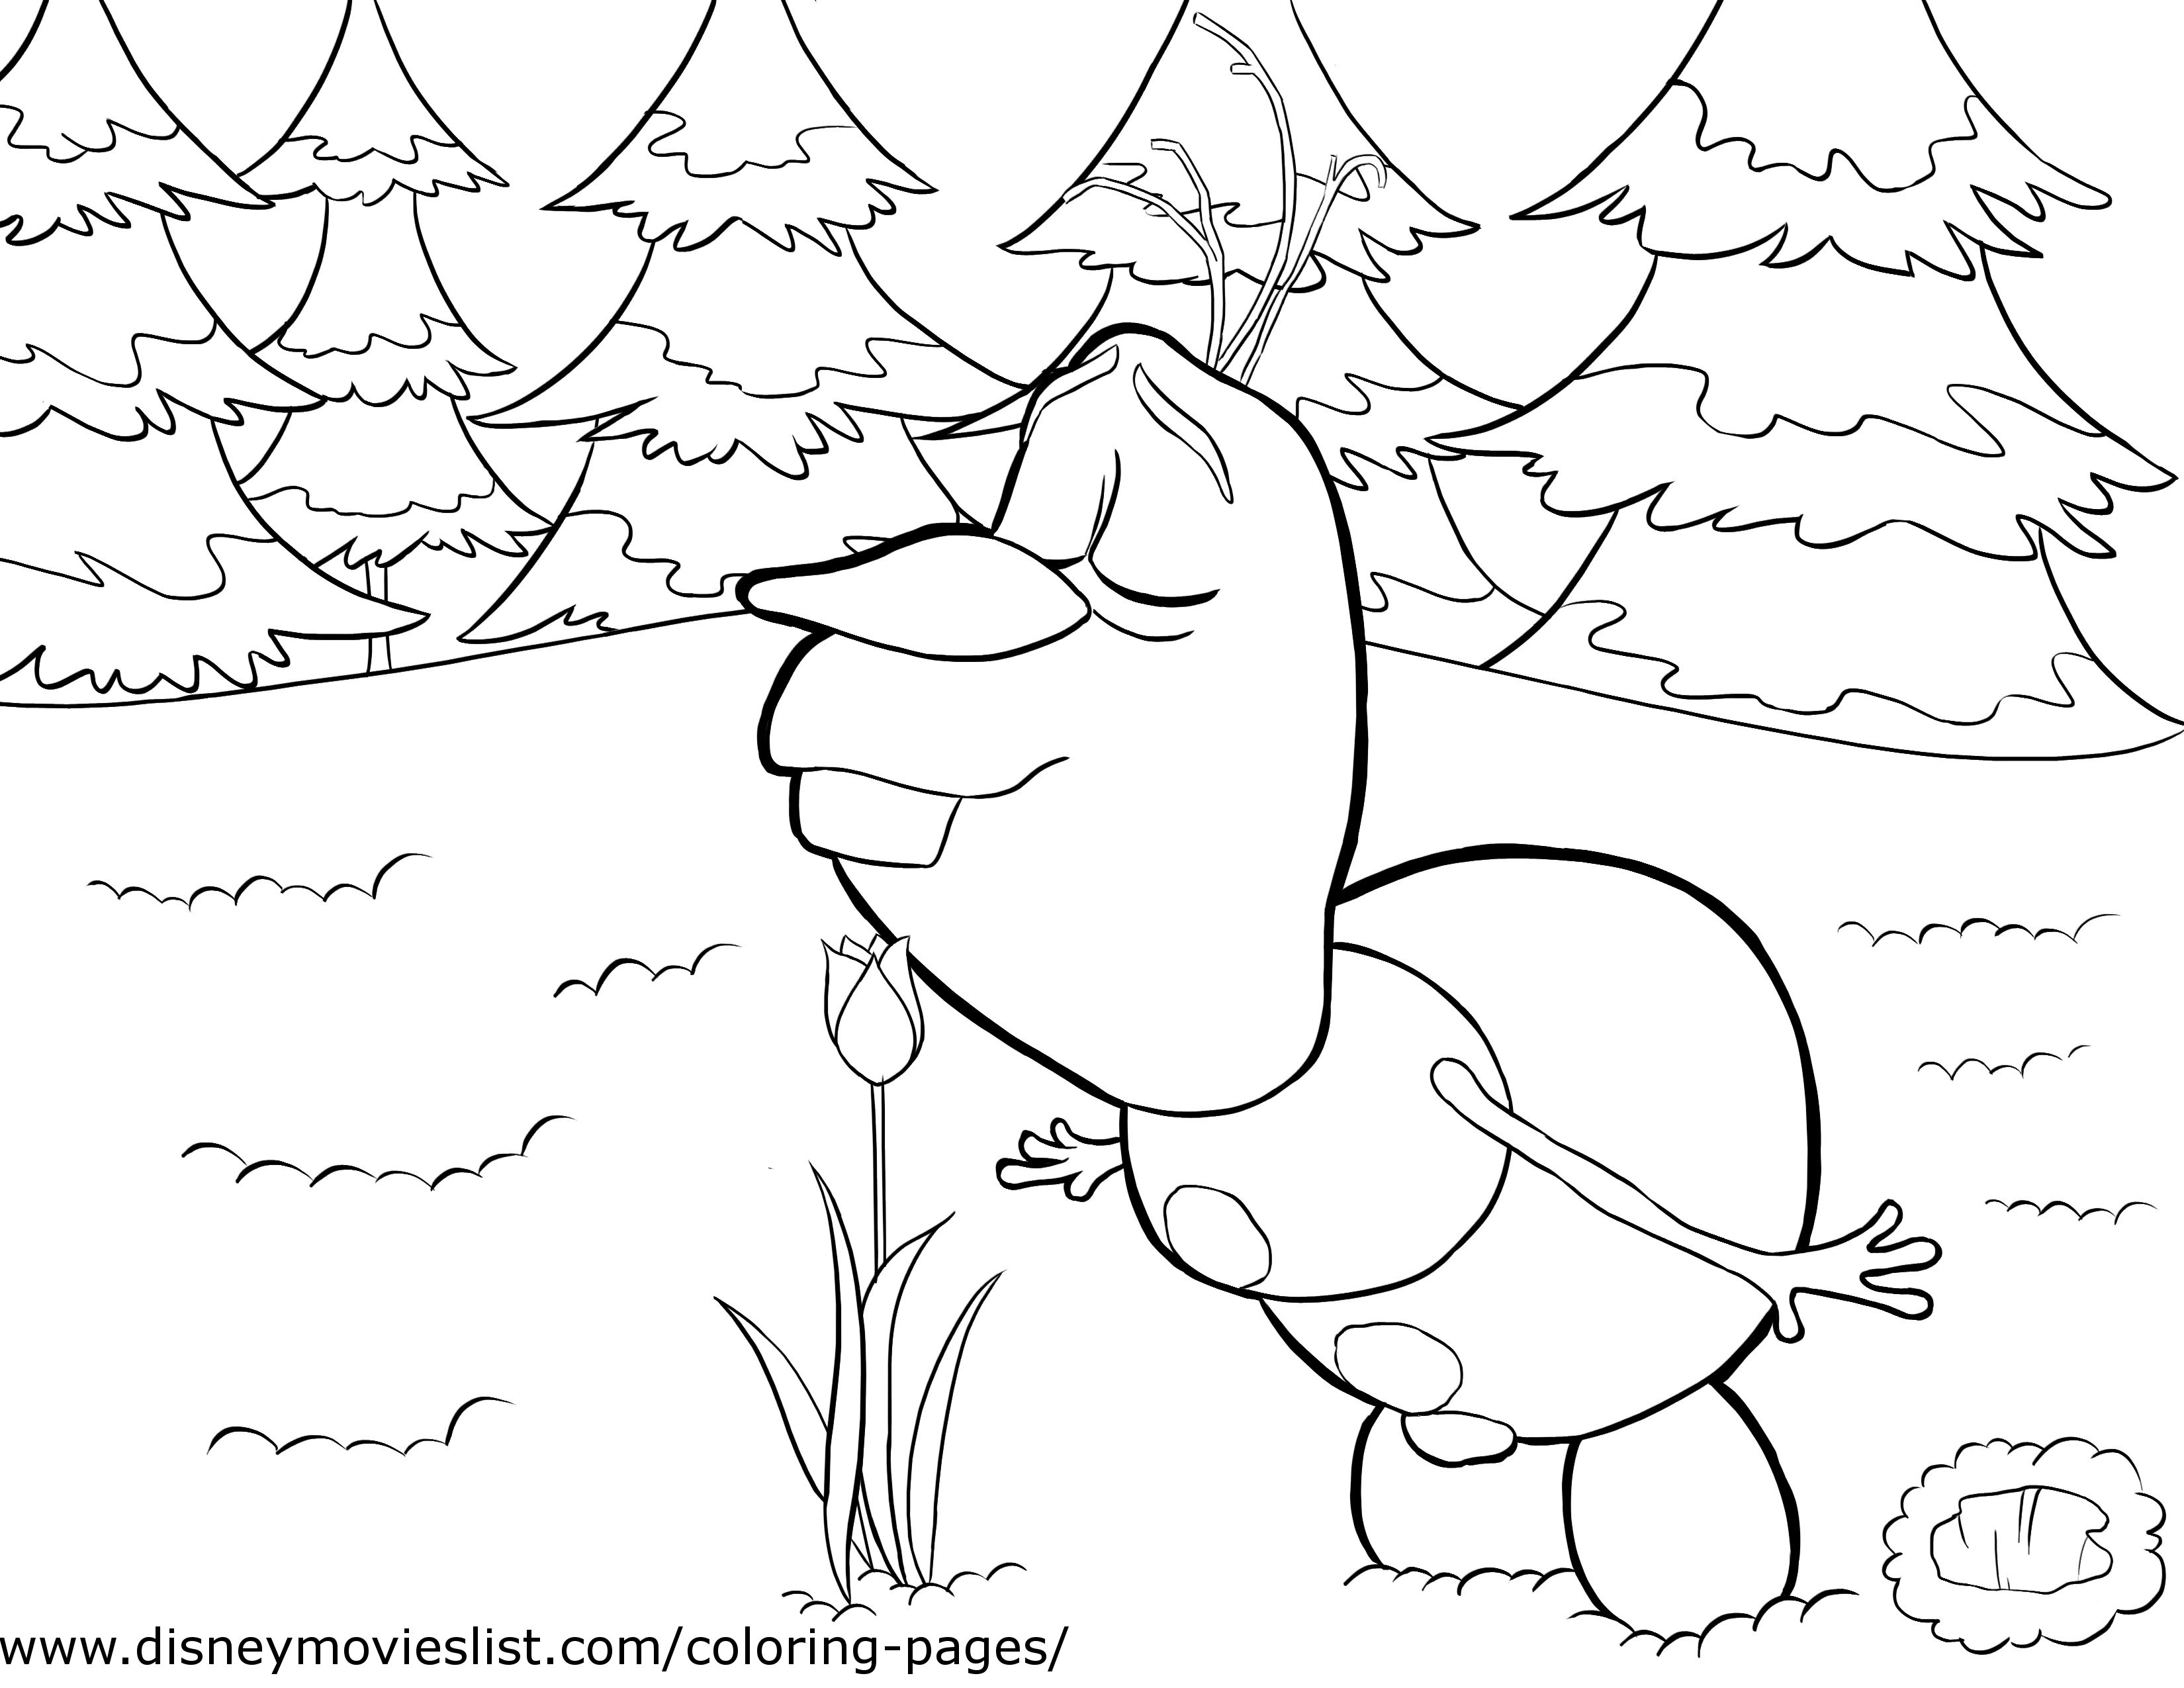 Frozen coloring #6, Download drawings